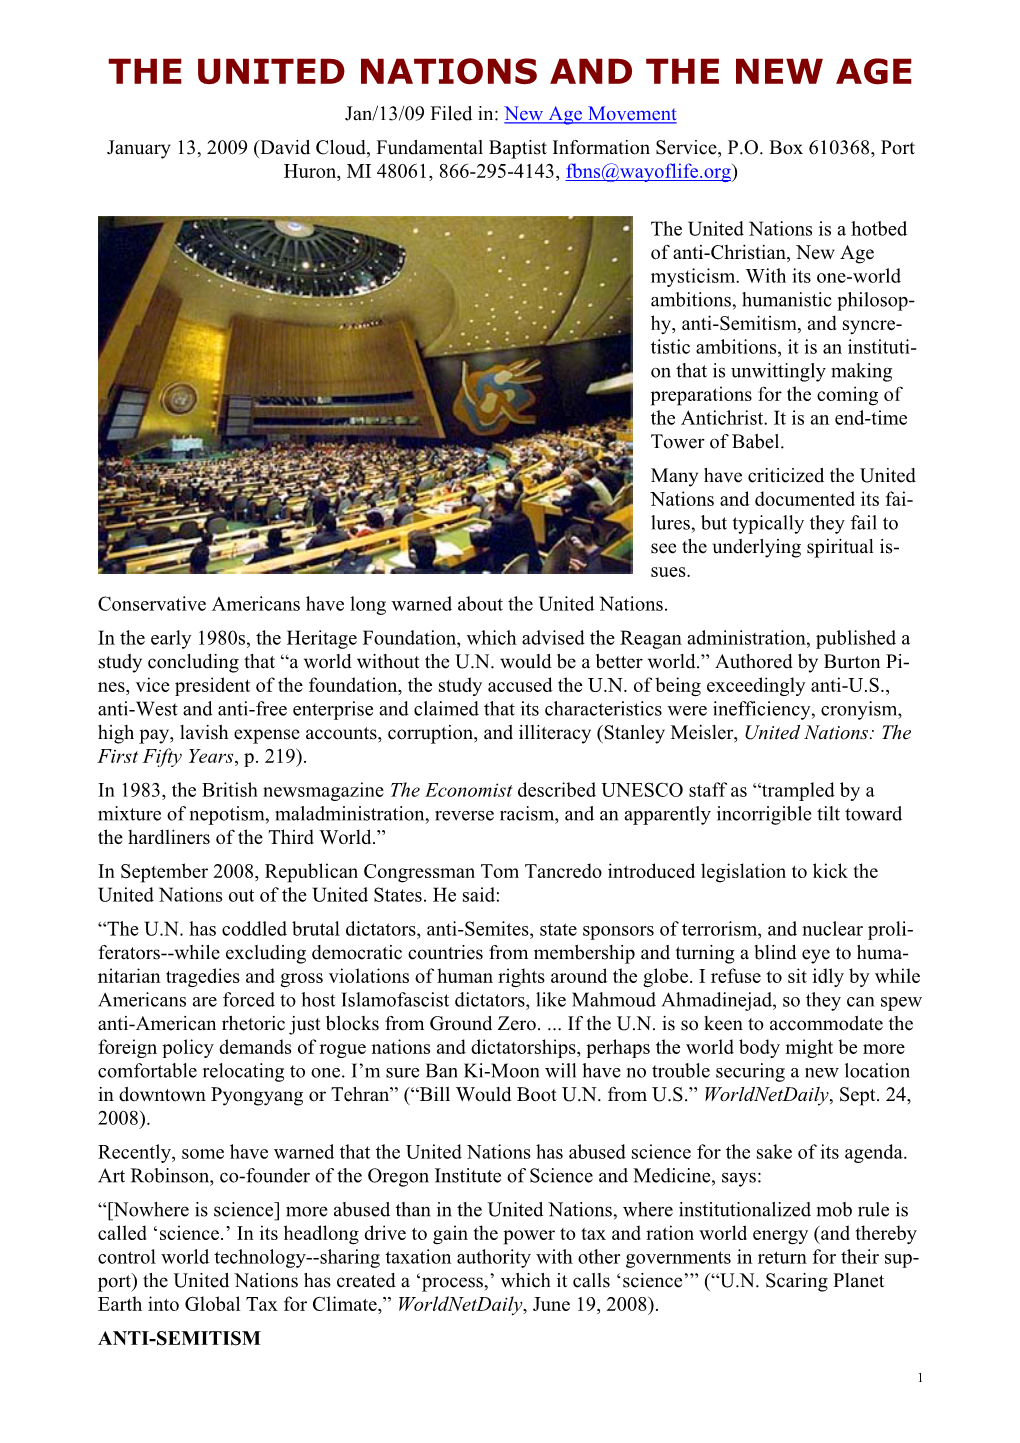 THE UNITED NATIONS and the NEW AGE Jan/13/09 Filed In: New Age Movement January 13, 2009 (David Cloud, Fundamental Baptist Information Service, P.O